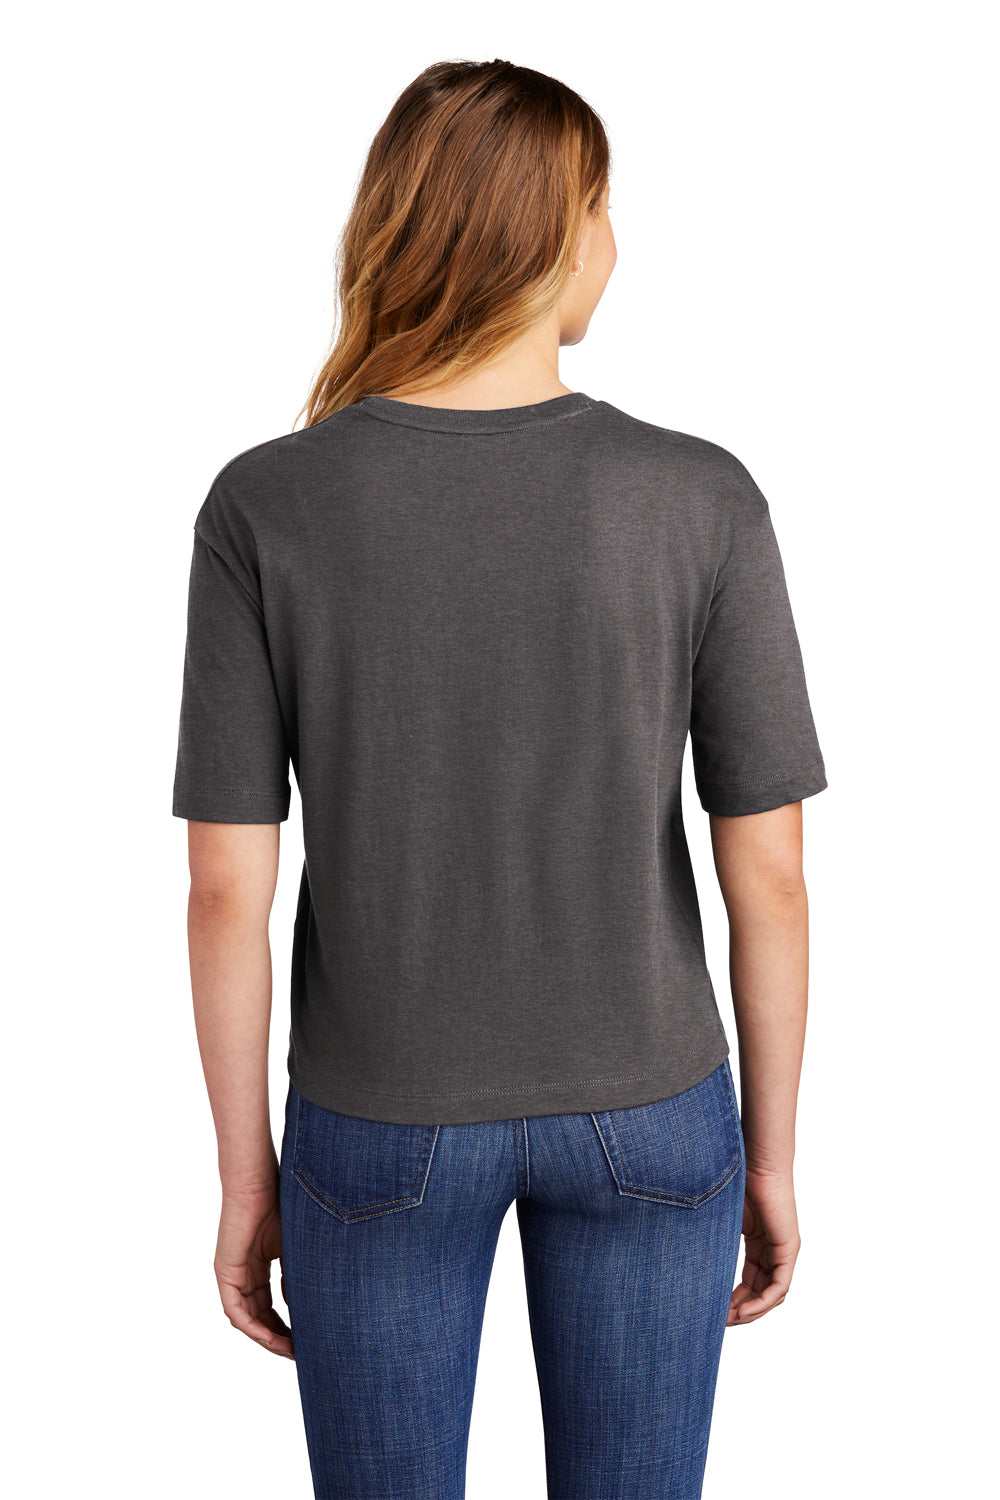 District Womens Very Important Boxy Short Sleeve Crewneck T-Shirt Heather Charcoal Grey Side